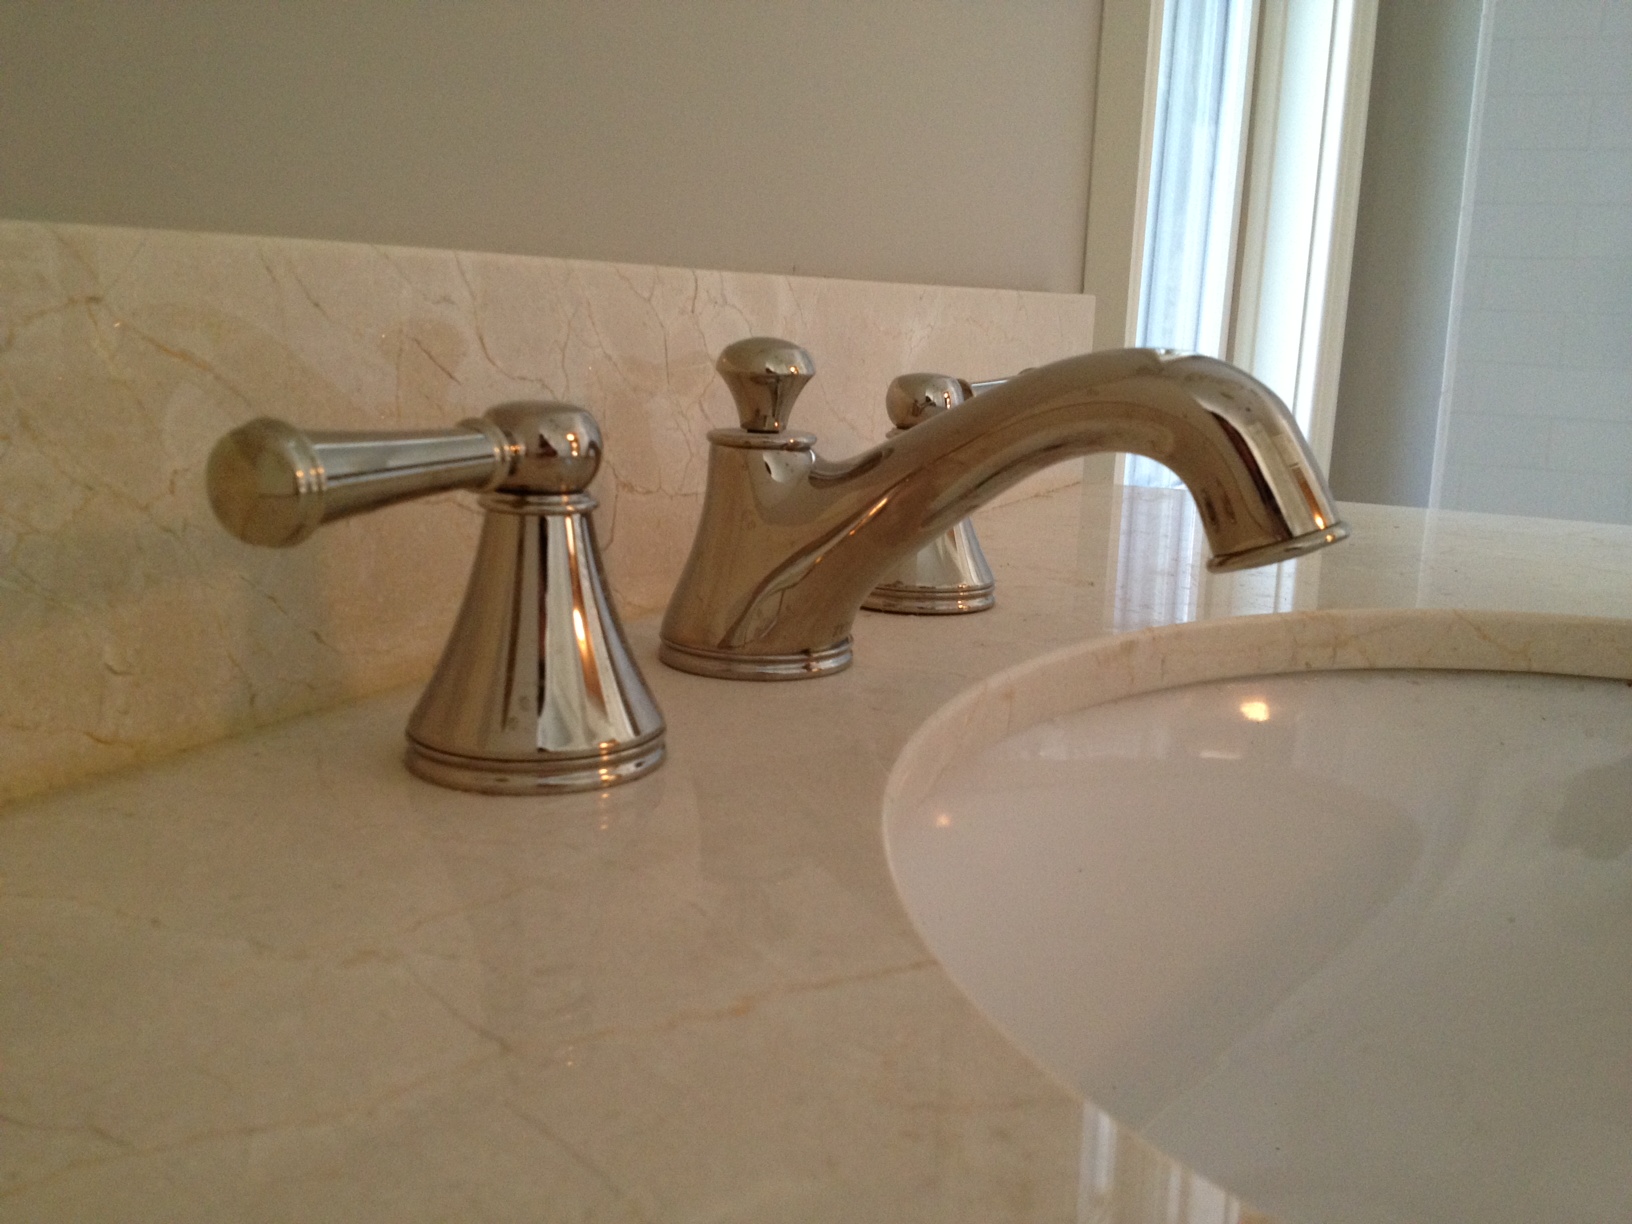 Polished Nickel Faucet, Crema Marfil, Revere Pewter